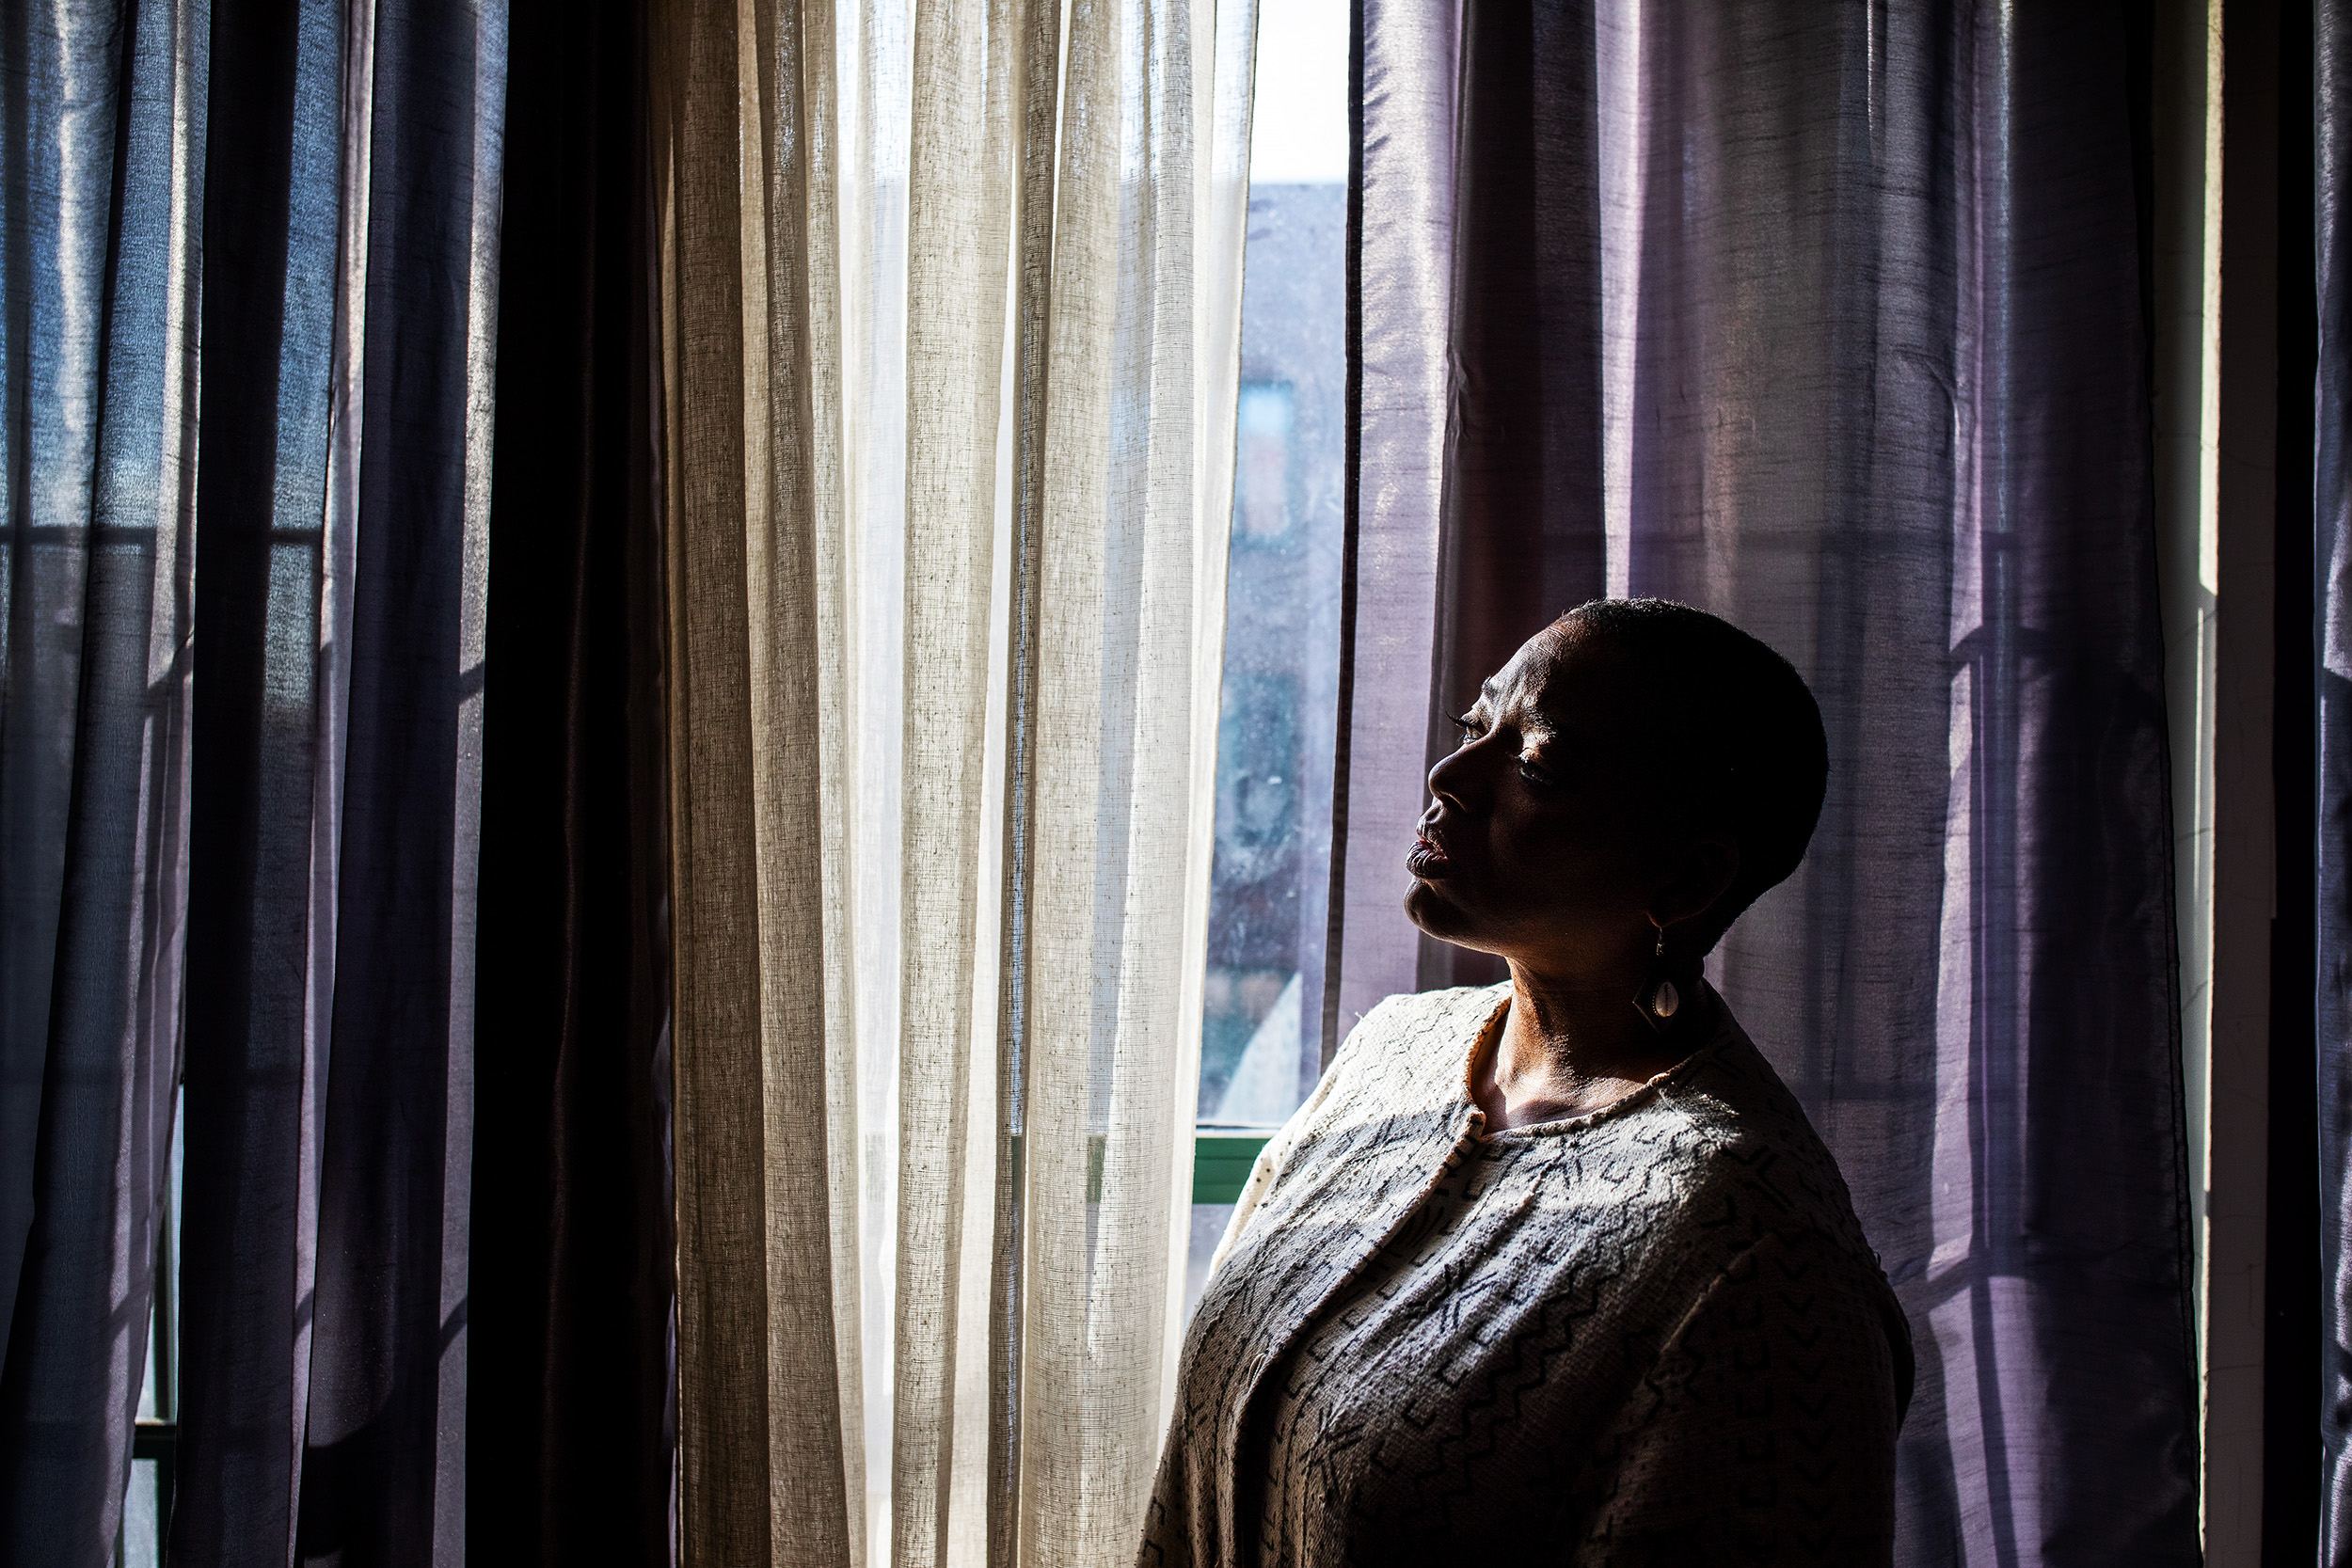  Parent Advocate Hope Newton a parent Advocate at the Center for Family Representation at her home in the Bronx, New York. “It’s like a scarlet letter,” said Hope Lyzette Newton, whose name was included on a New York State list of people who mistreat